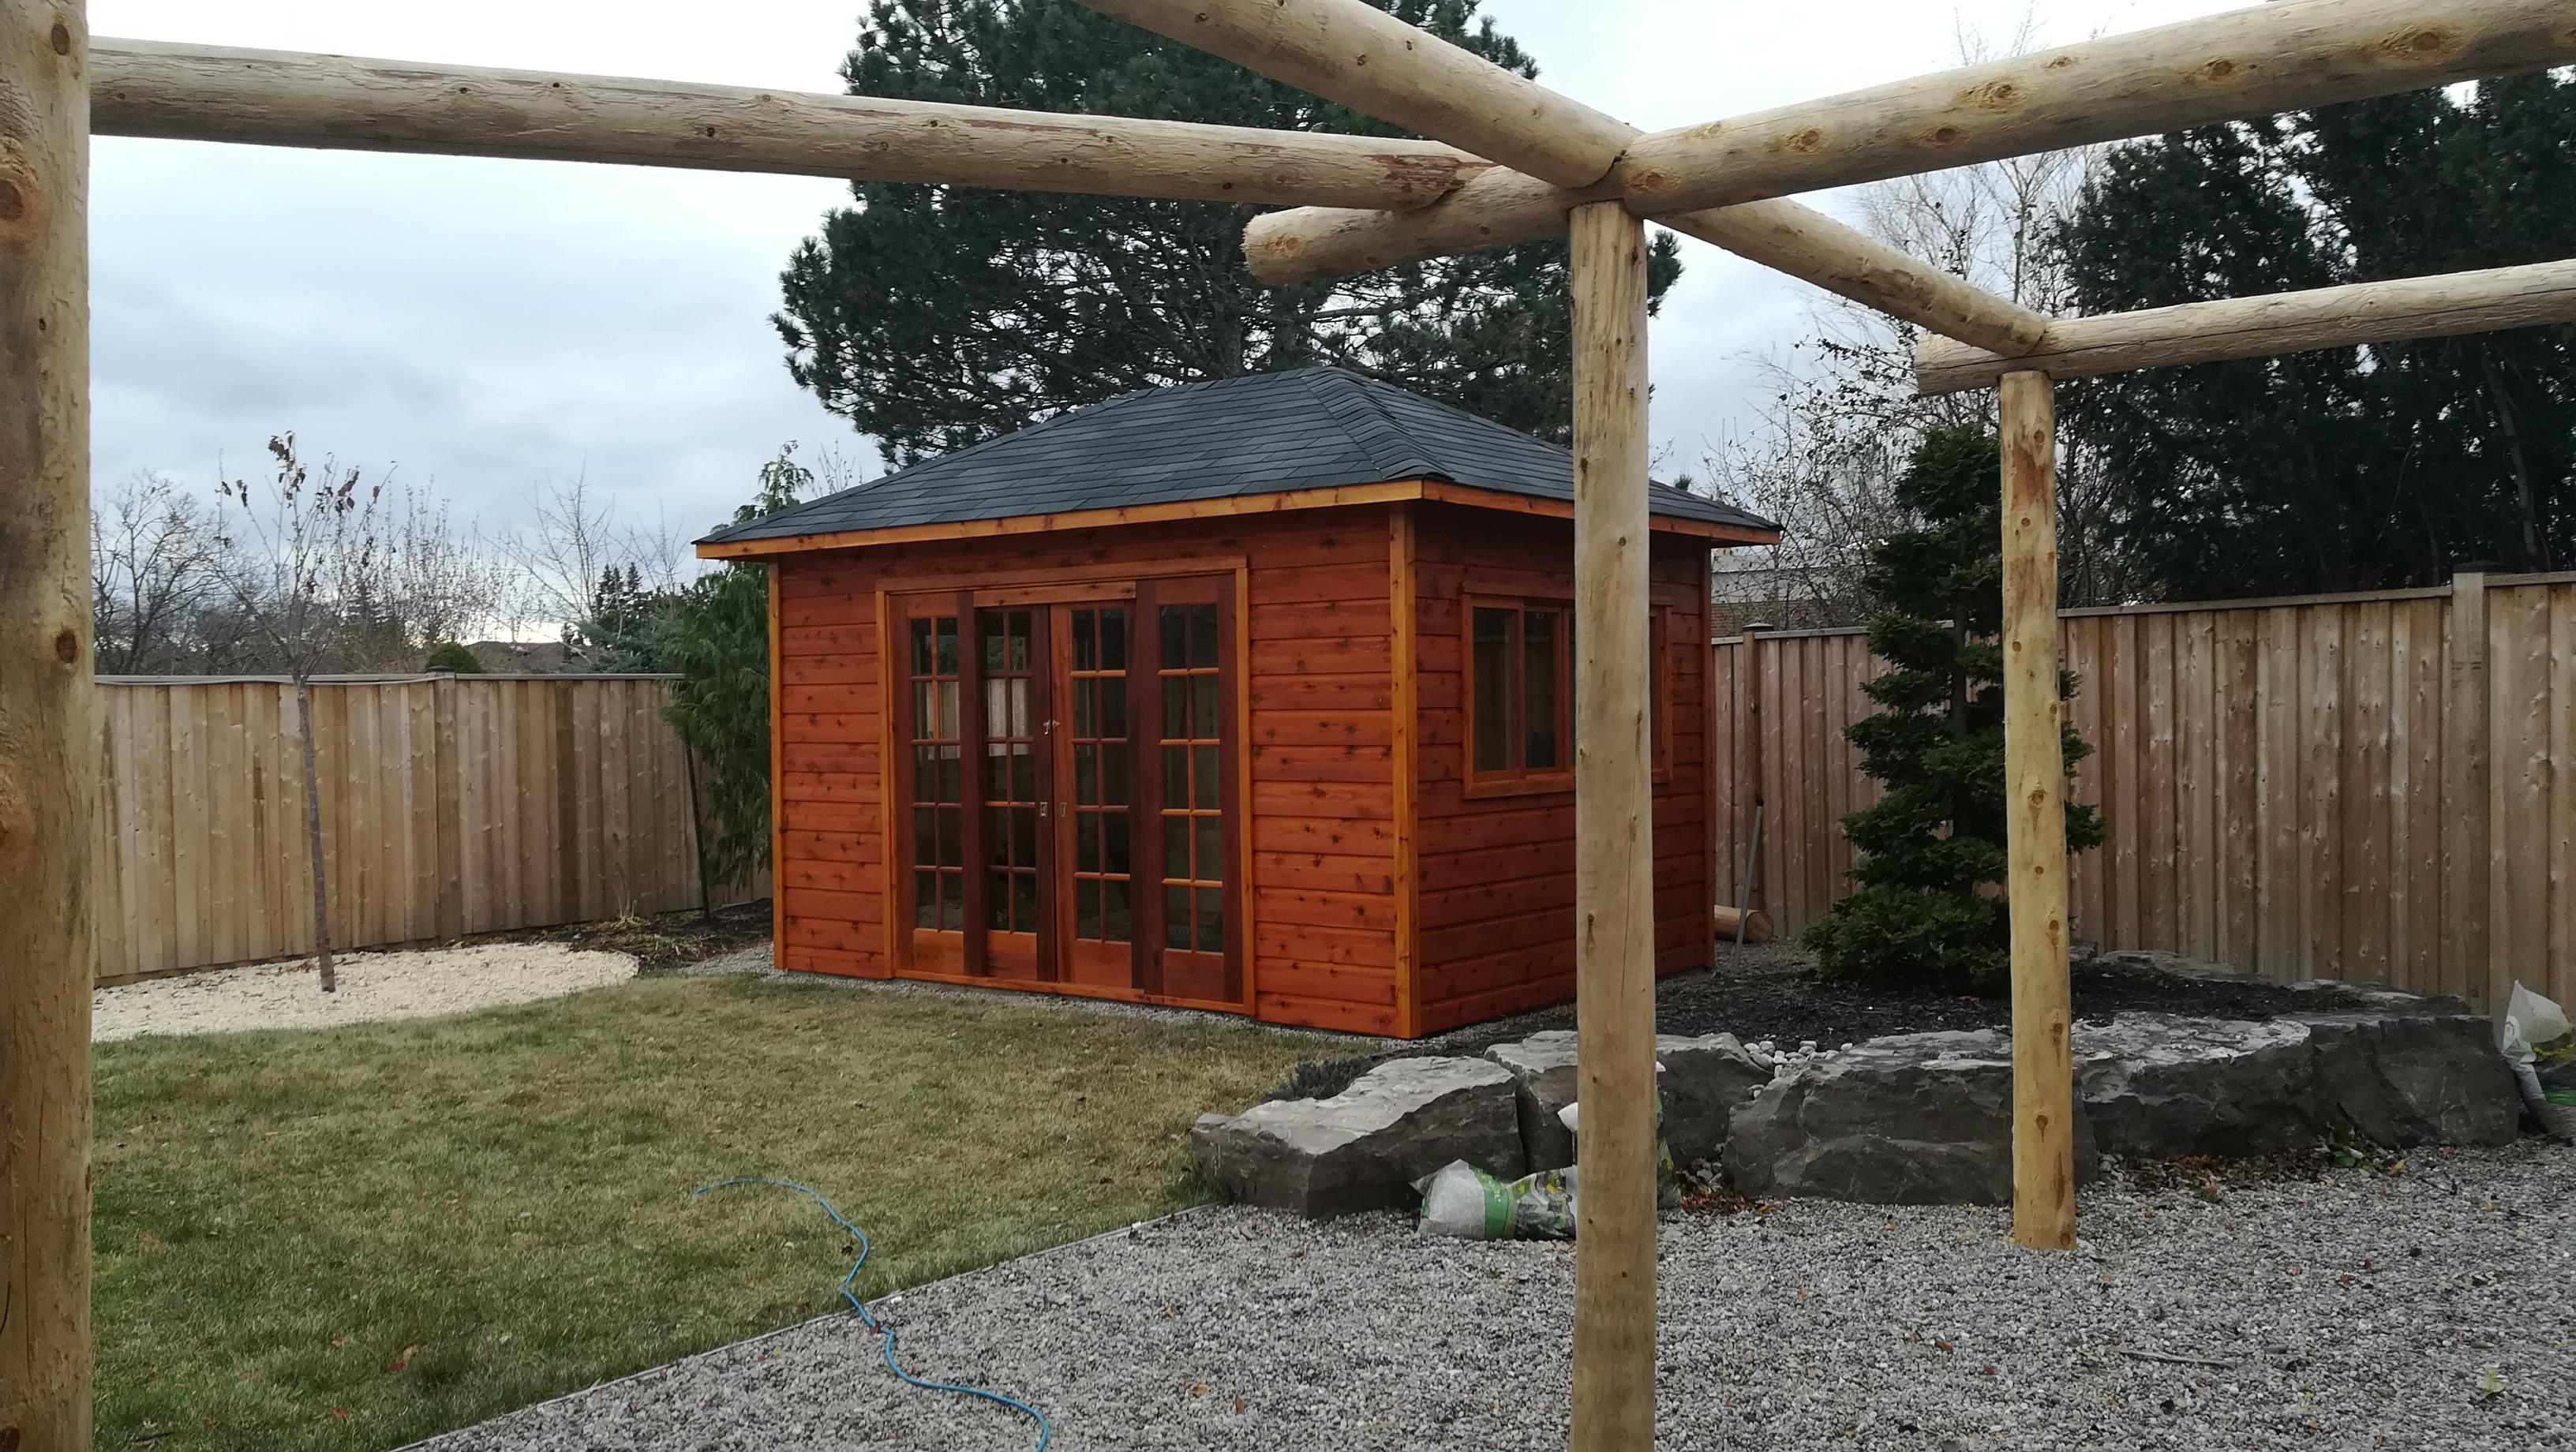 Cedar Sonoma 10x14 shed kit with Double French Doors in Brampton Ontario. ID number 221381